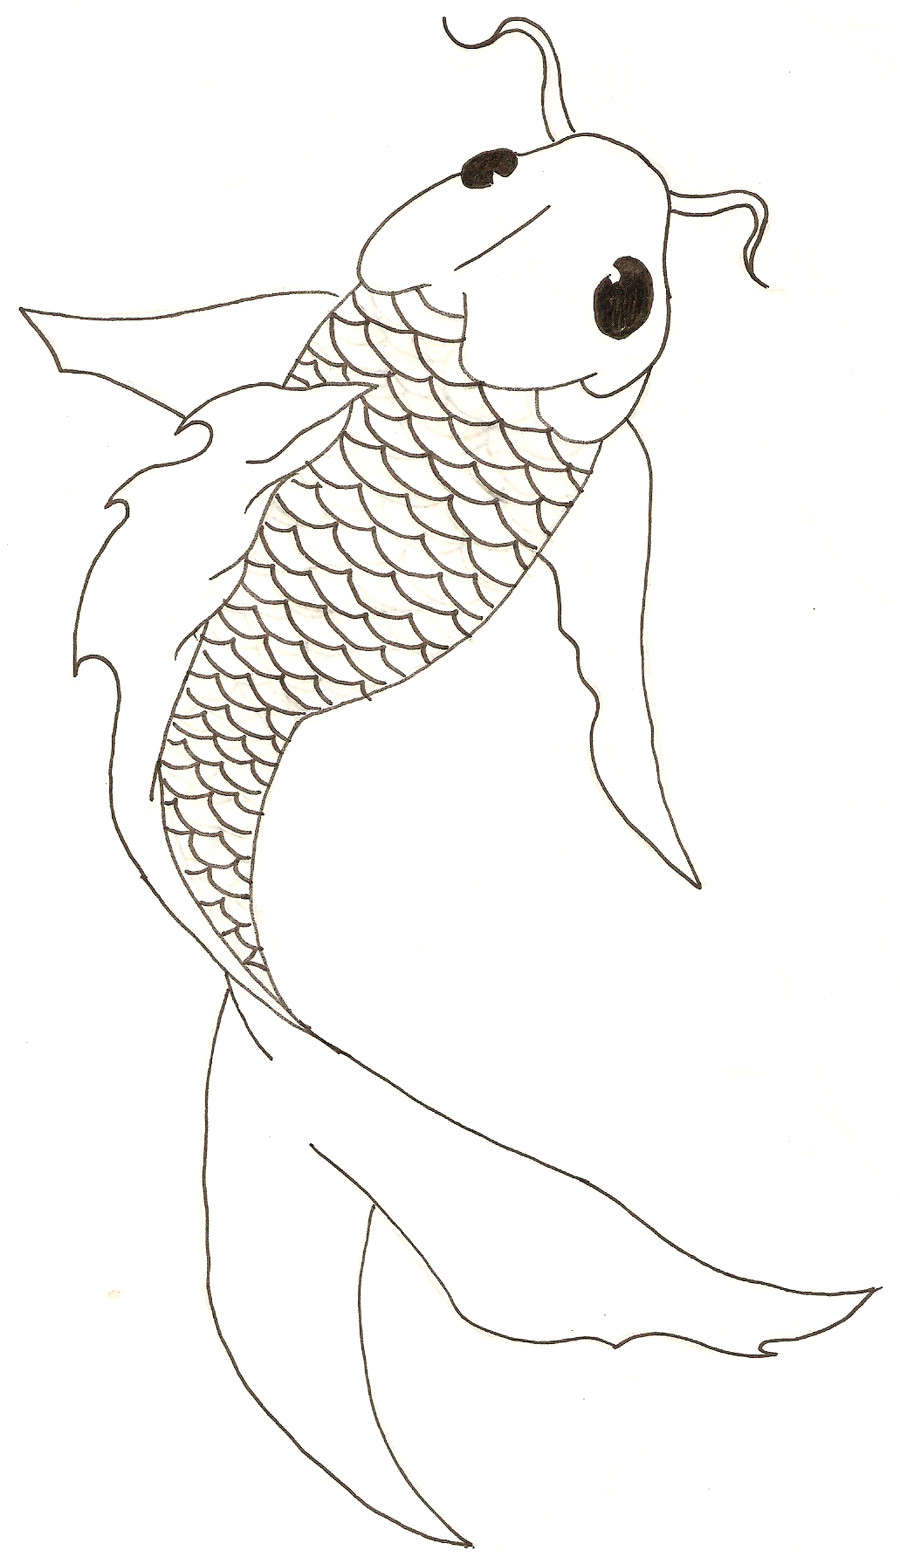 Easy Drawings Of Koi Fish Nice Fish Drawing Could Be Adapted for Stained Glass Koi